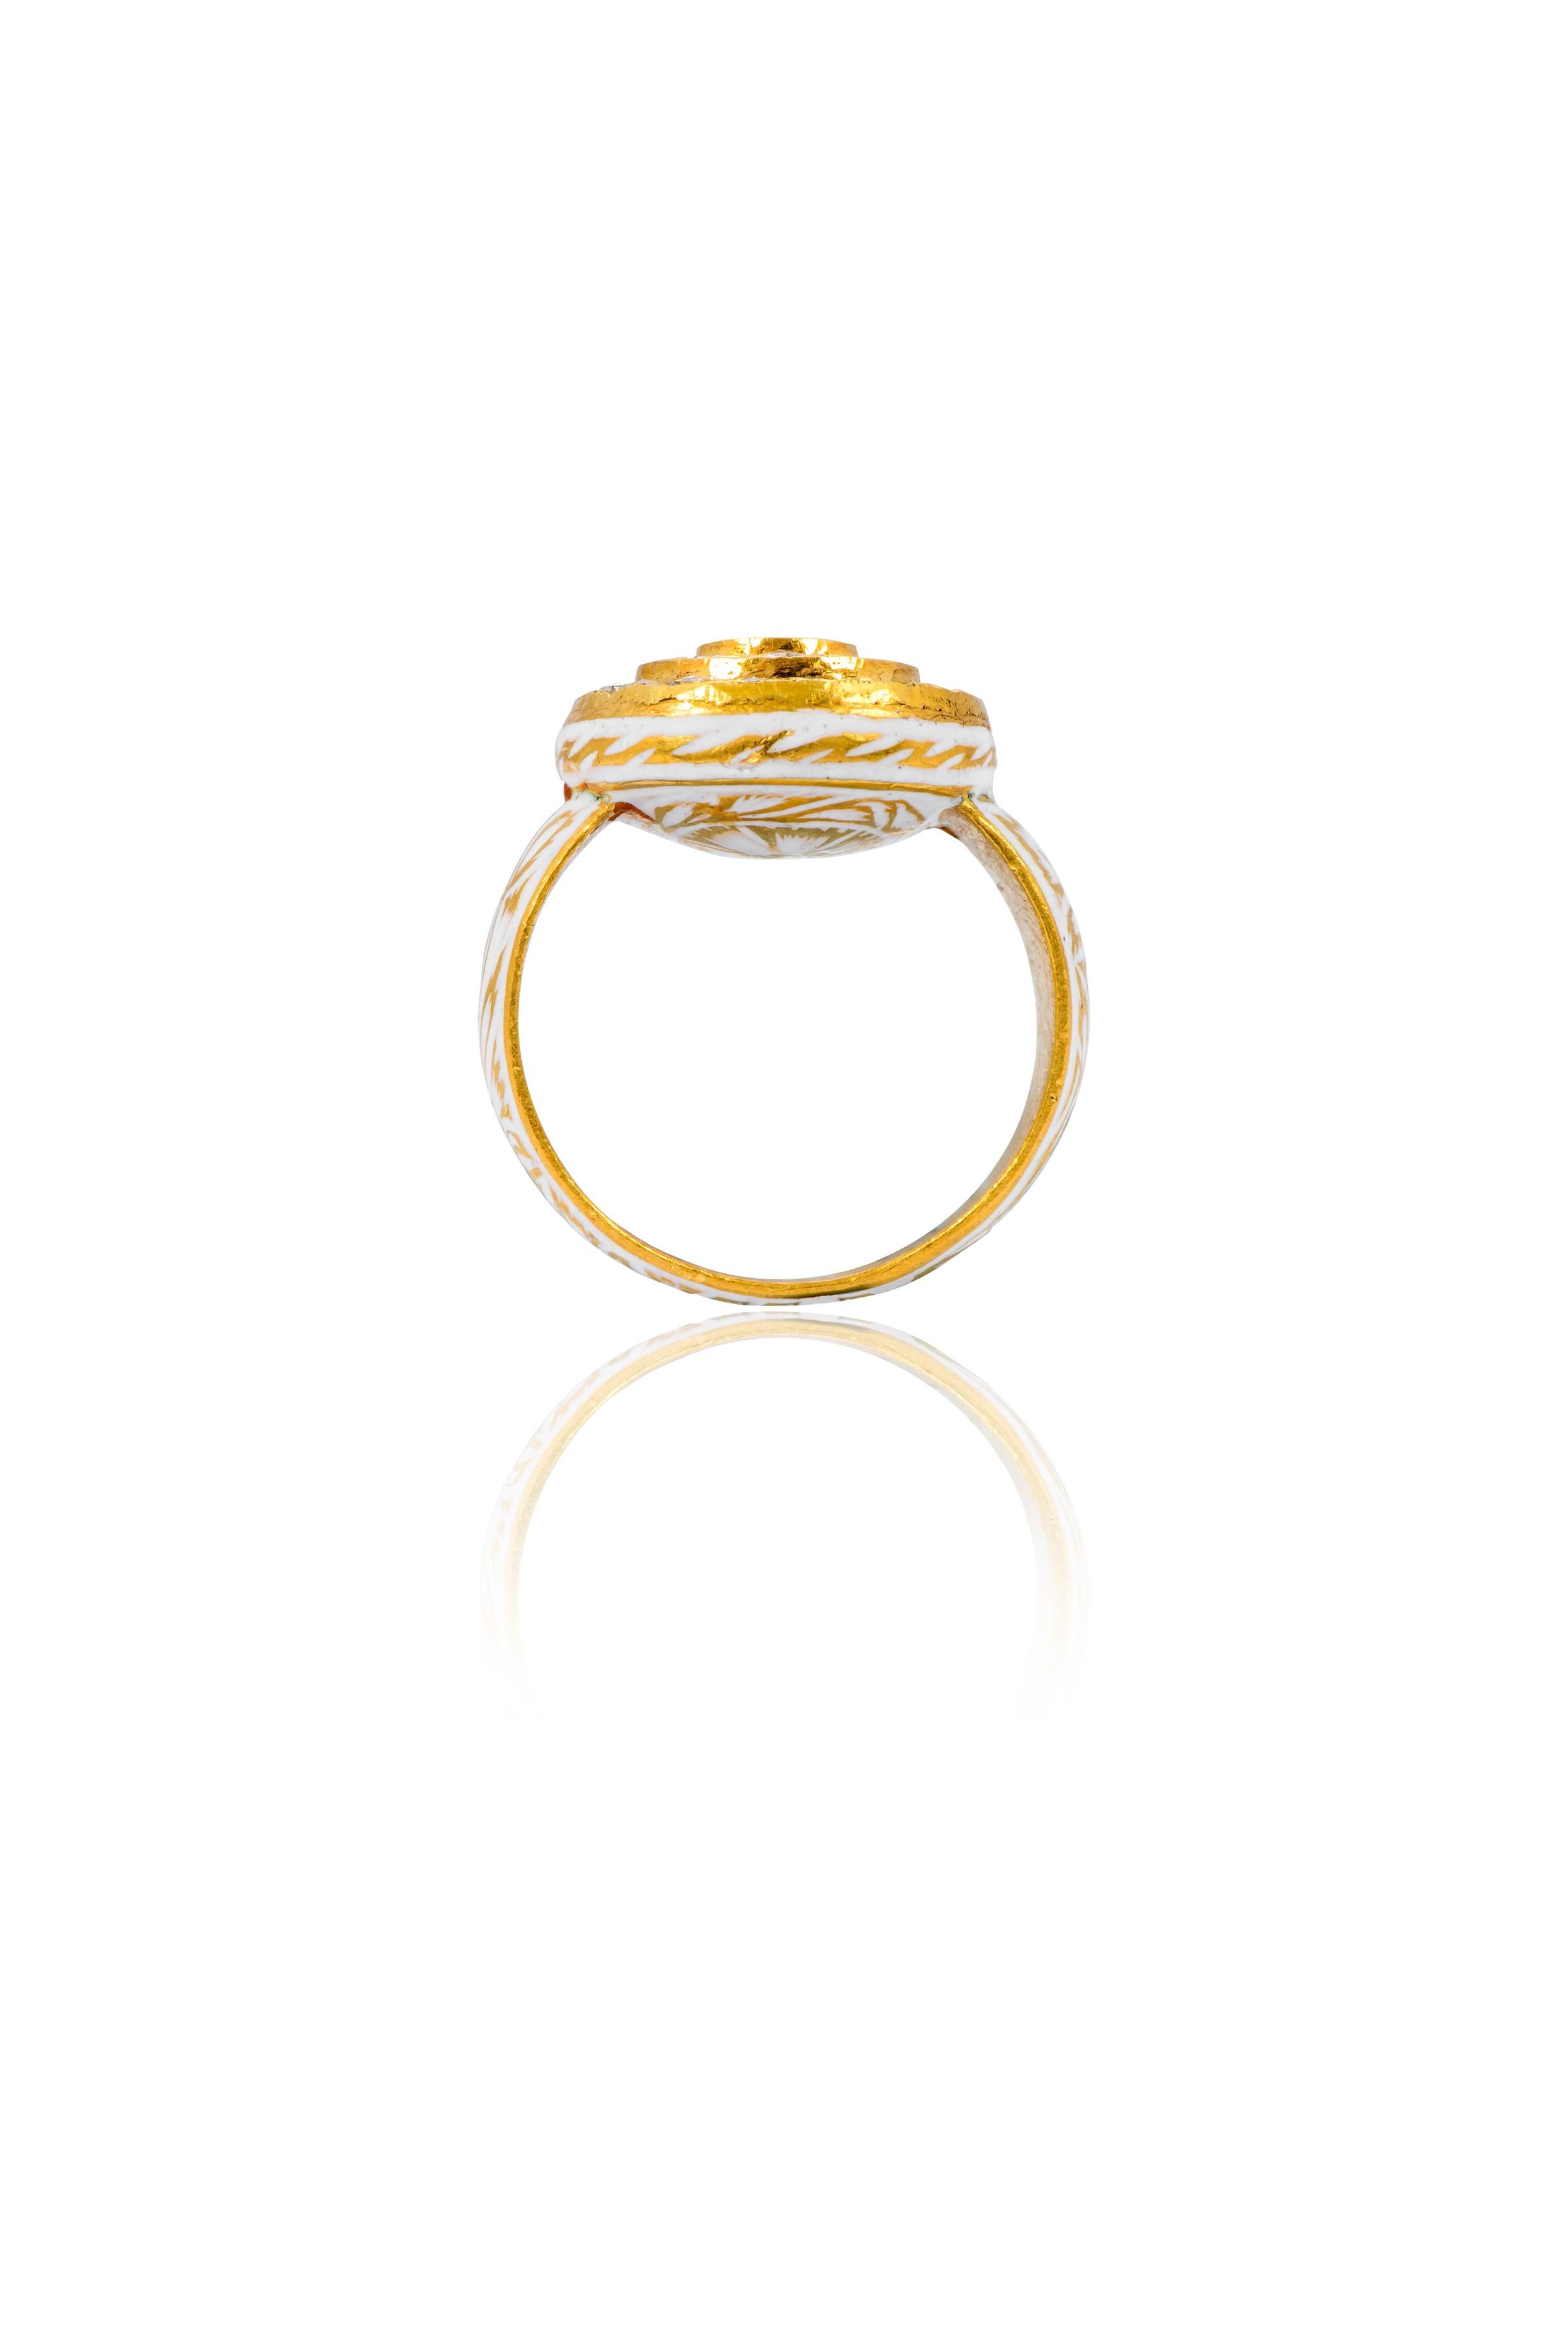 Rose Cut 22 Karat Gold Rose-Cut Diamond Ring Handcrafted with White Enamel Work  For Sale